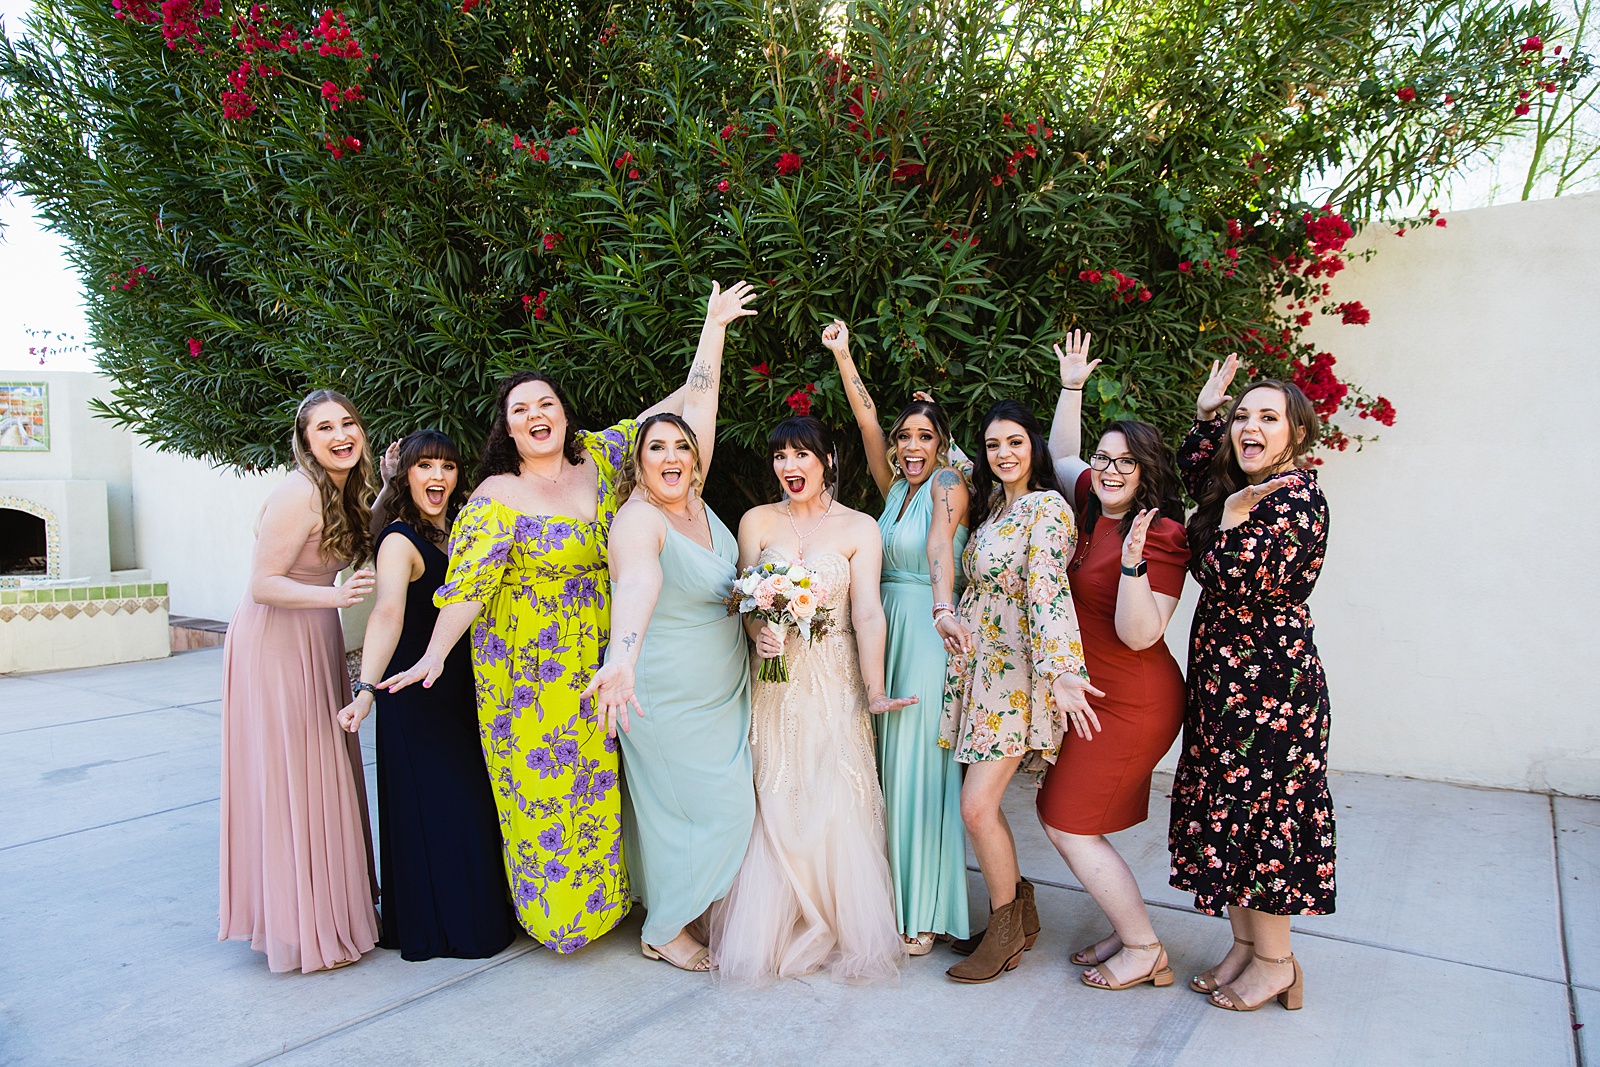 Bride and bridesmaids laughing together at Bella Rose Estate wedding by Chandler wedding photographer PMA Photography.